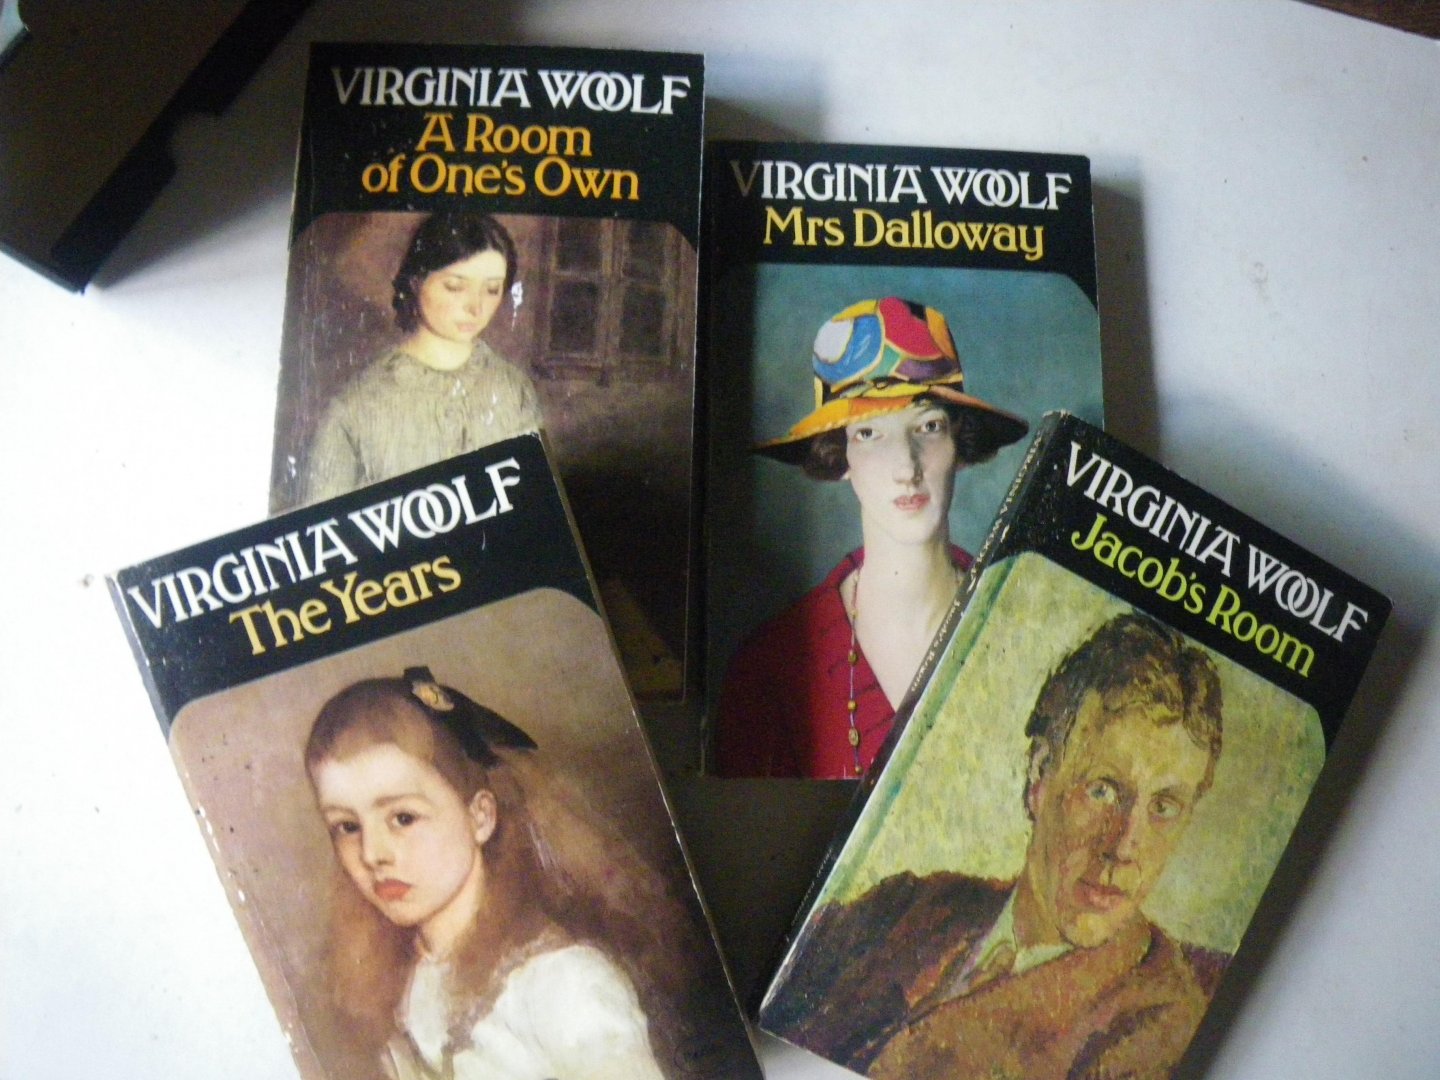 WOOLF Viriginia - Virginia Woolf, The Classic Works: A Room of One's Own, Orlando, Jacob's Room, Mrs. Dalloway, The Years